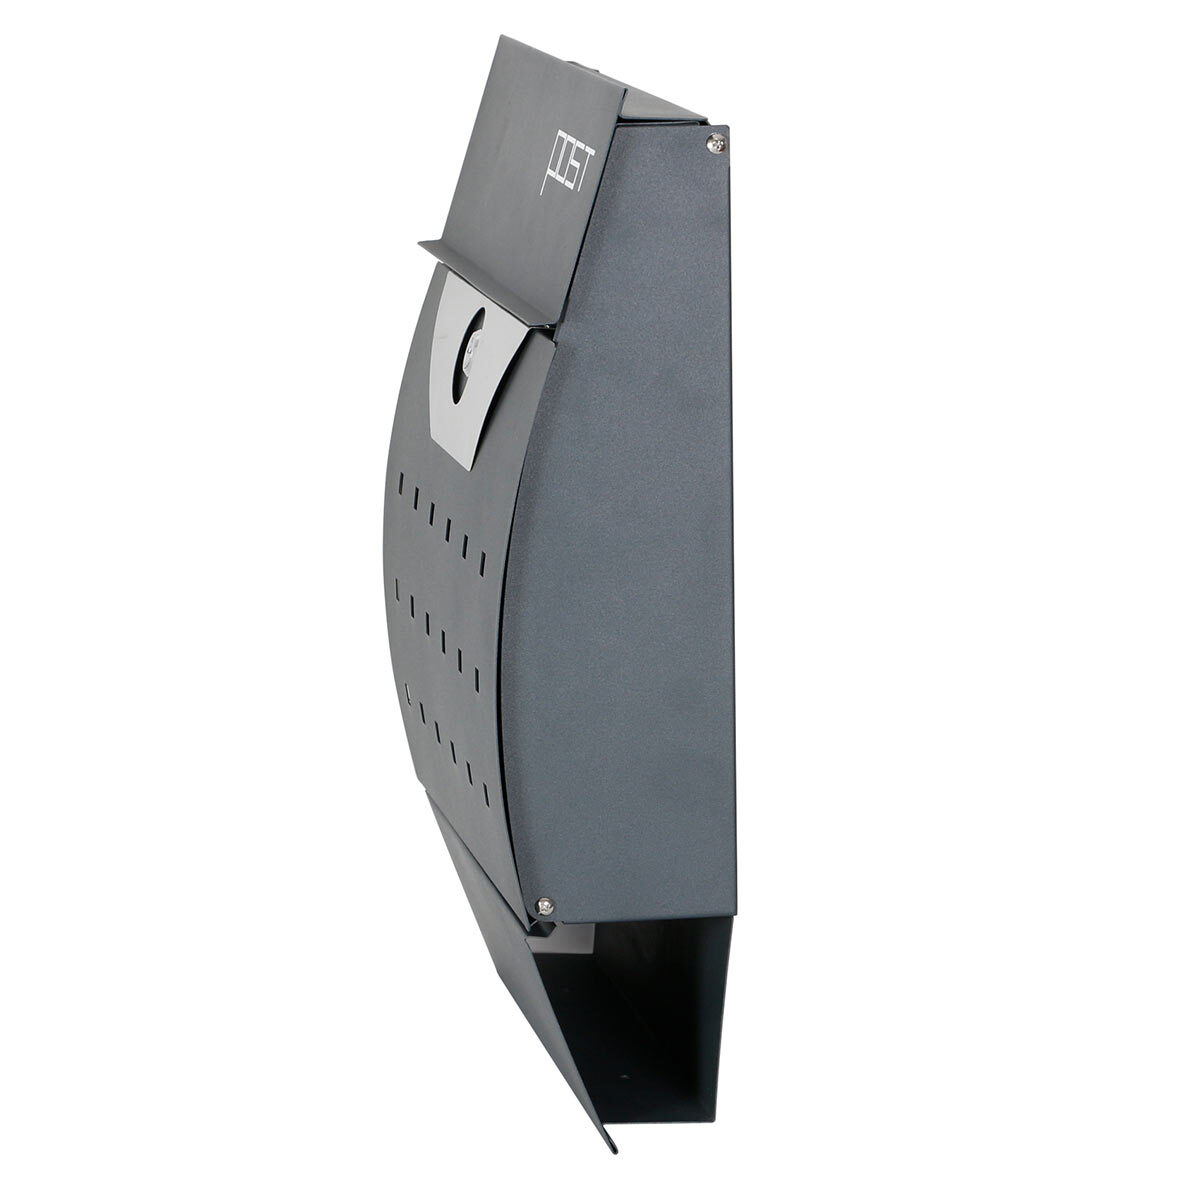 Cut out side profile of letterbox on white background